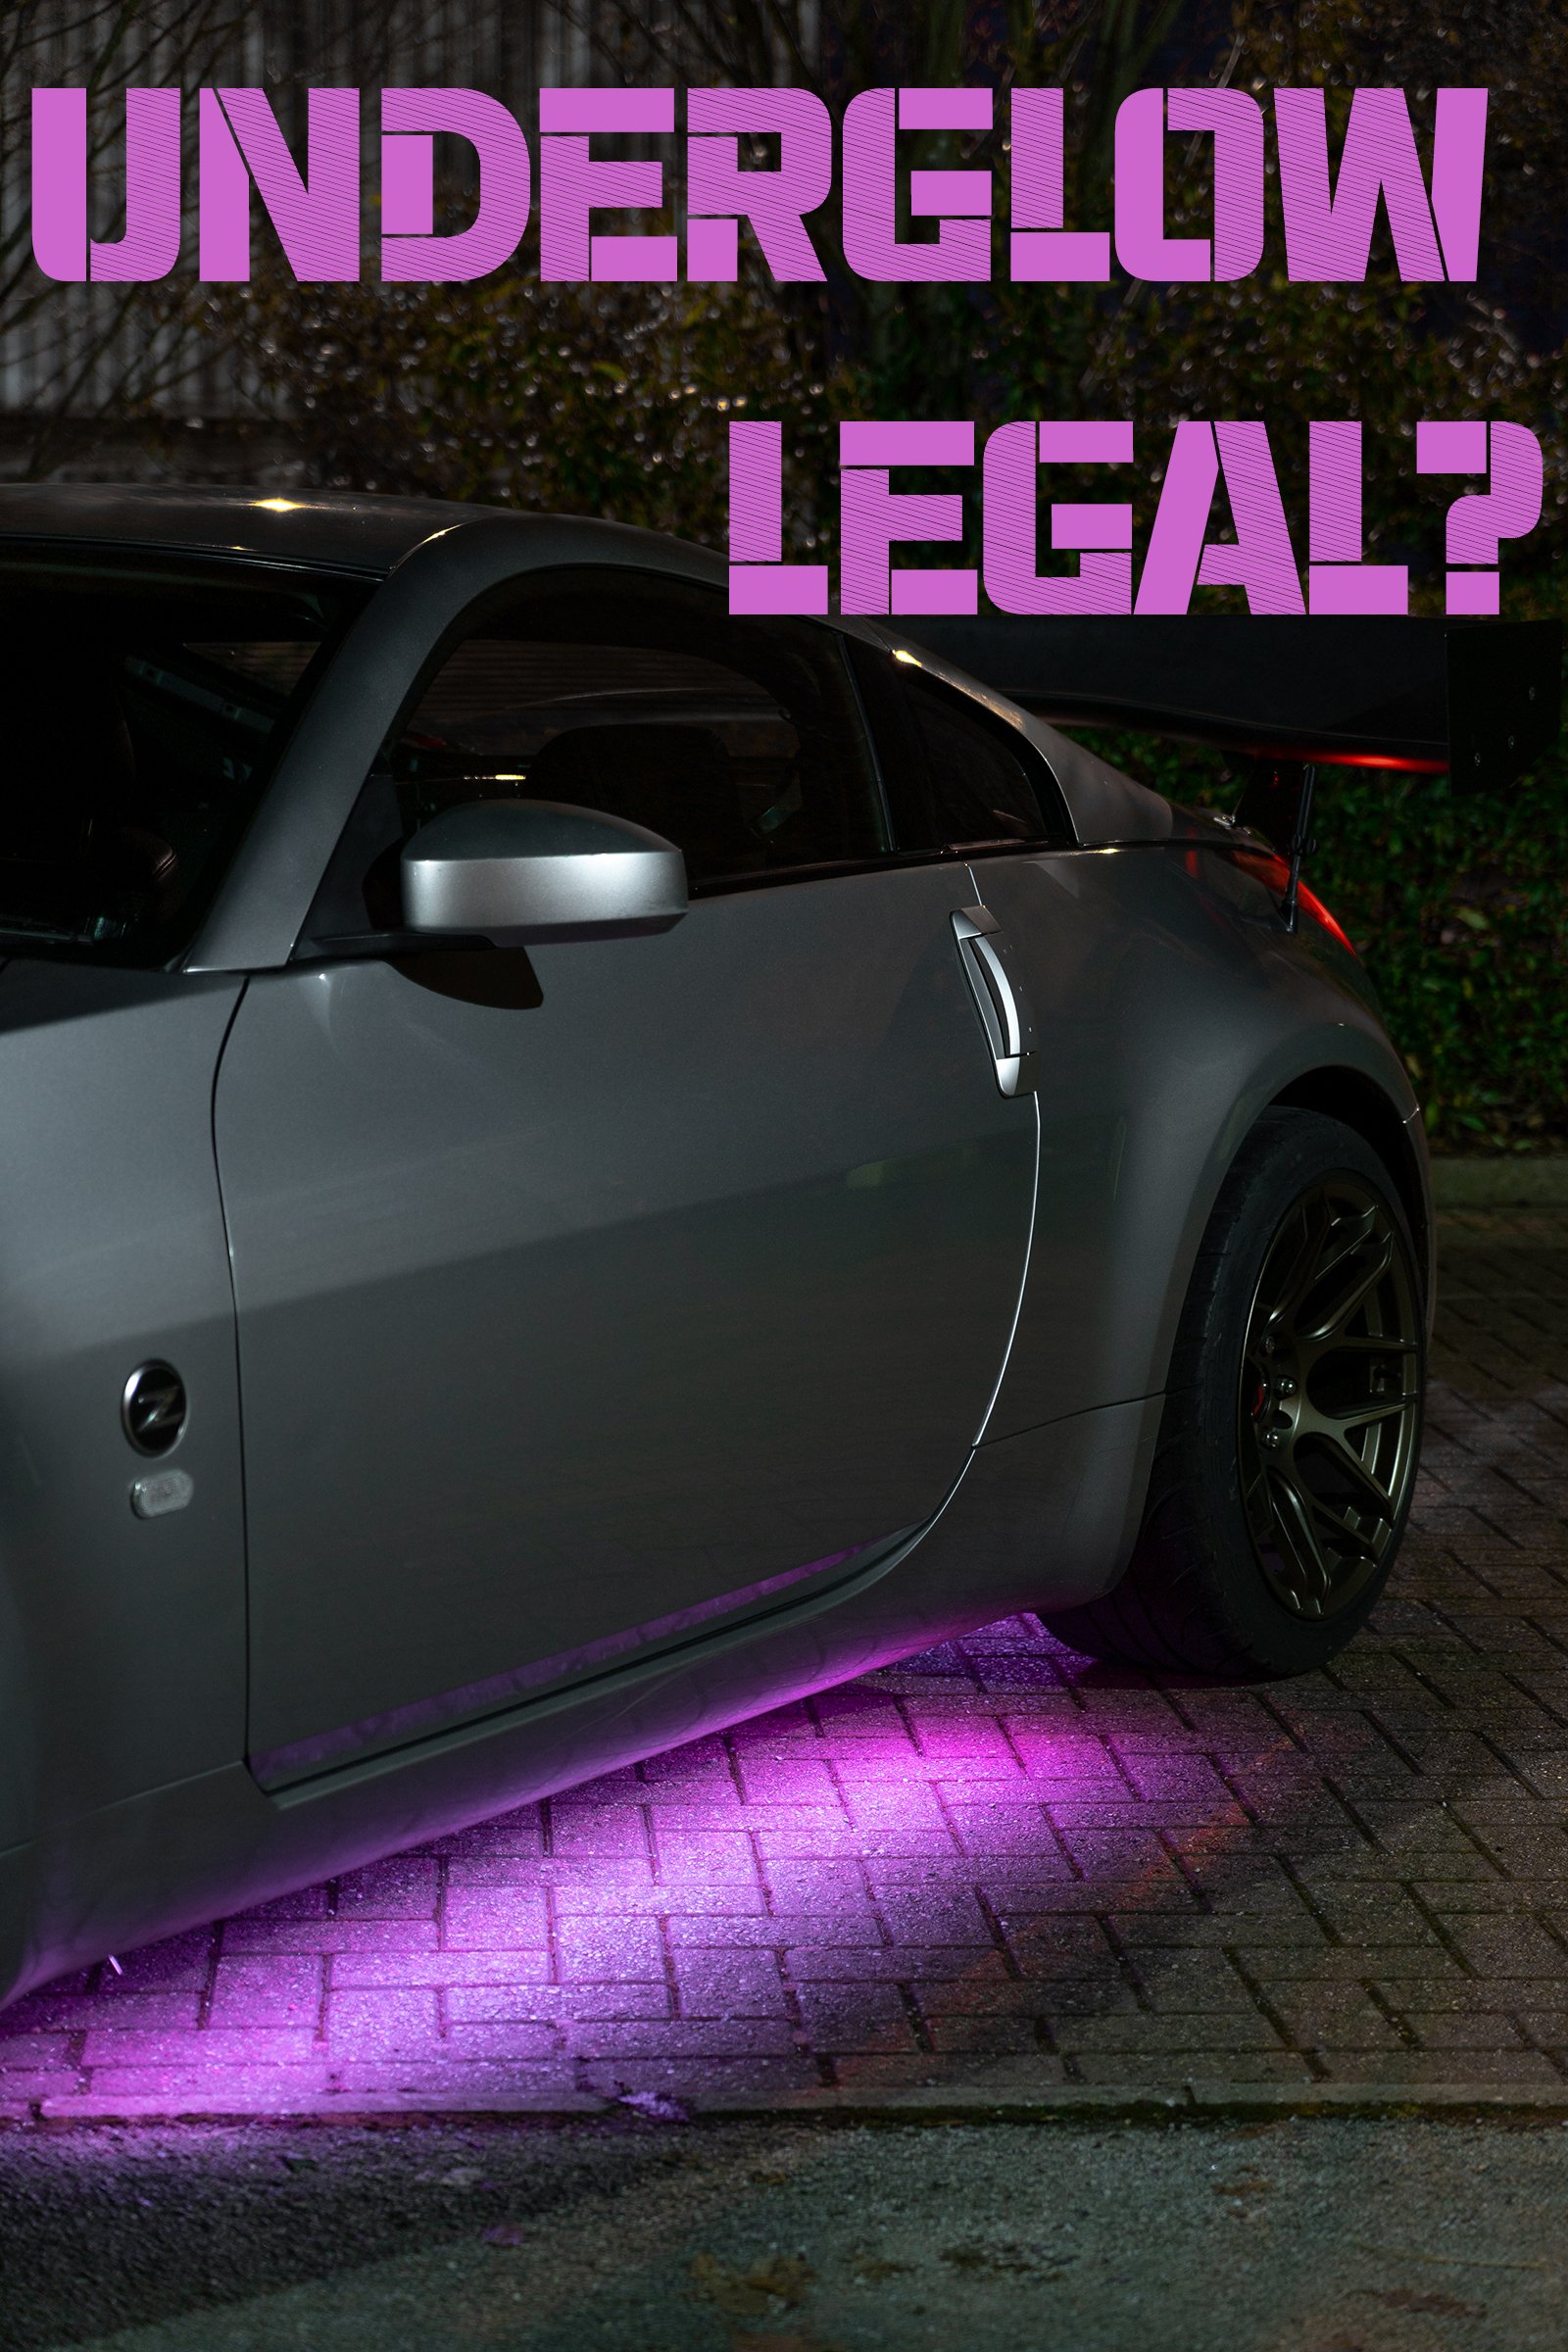 Are Underglow Lights Illegal In The UK? - The Ultimate Guide